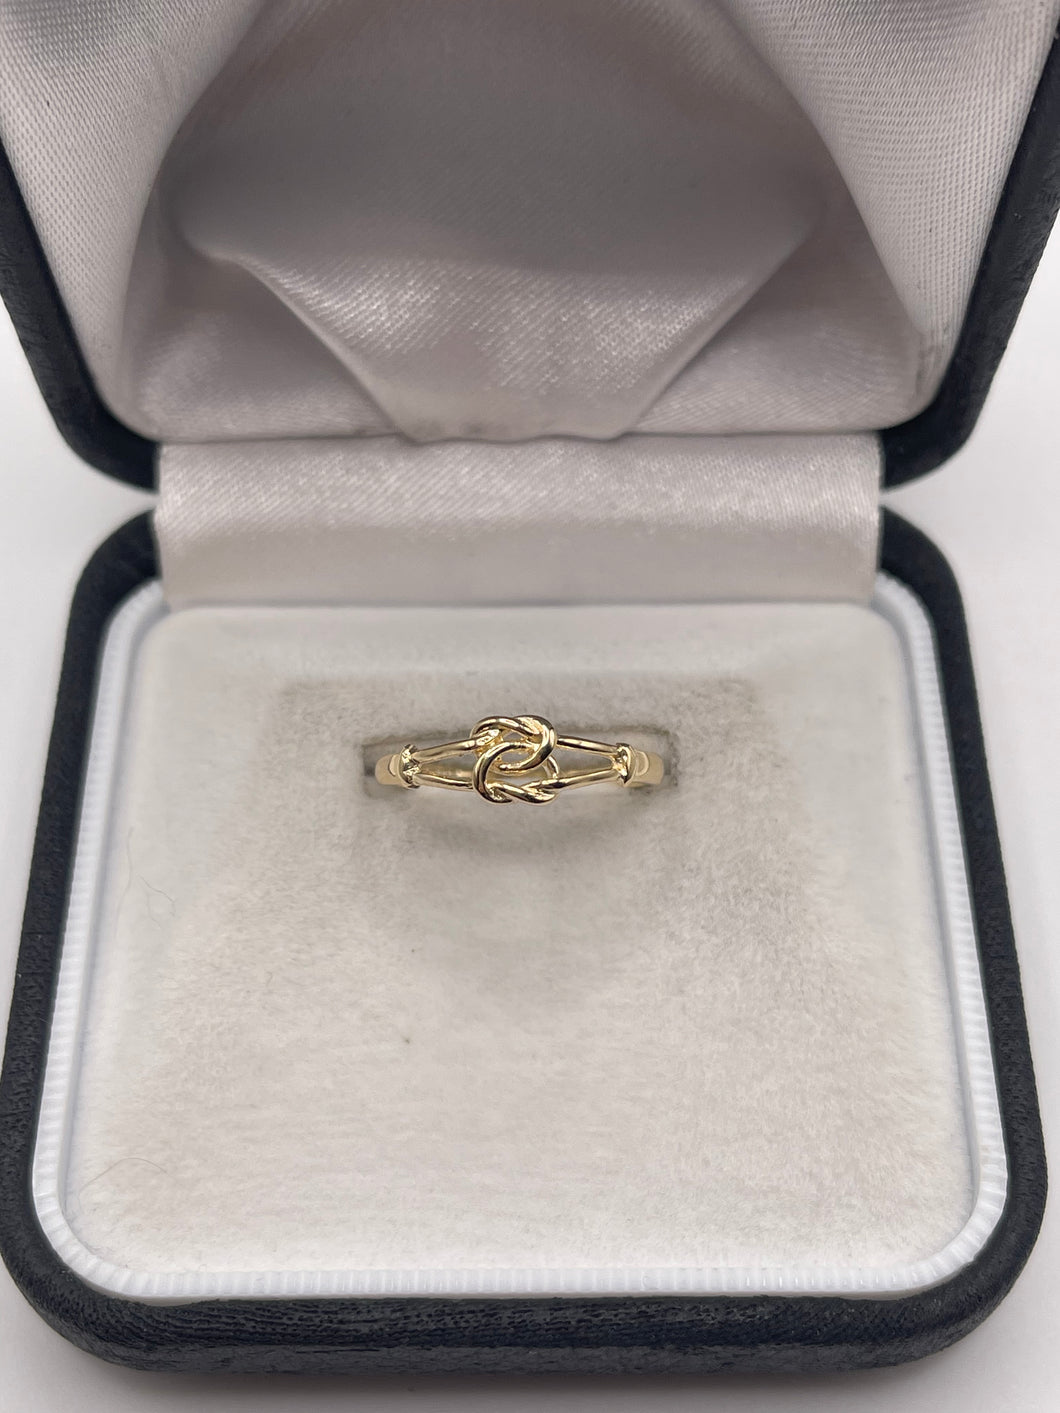 9ct gold knot ring